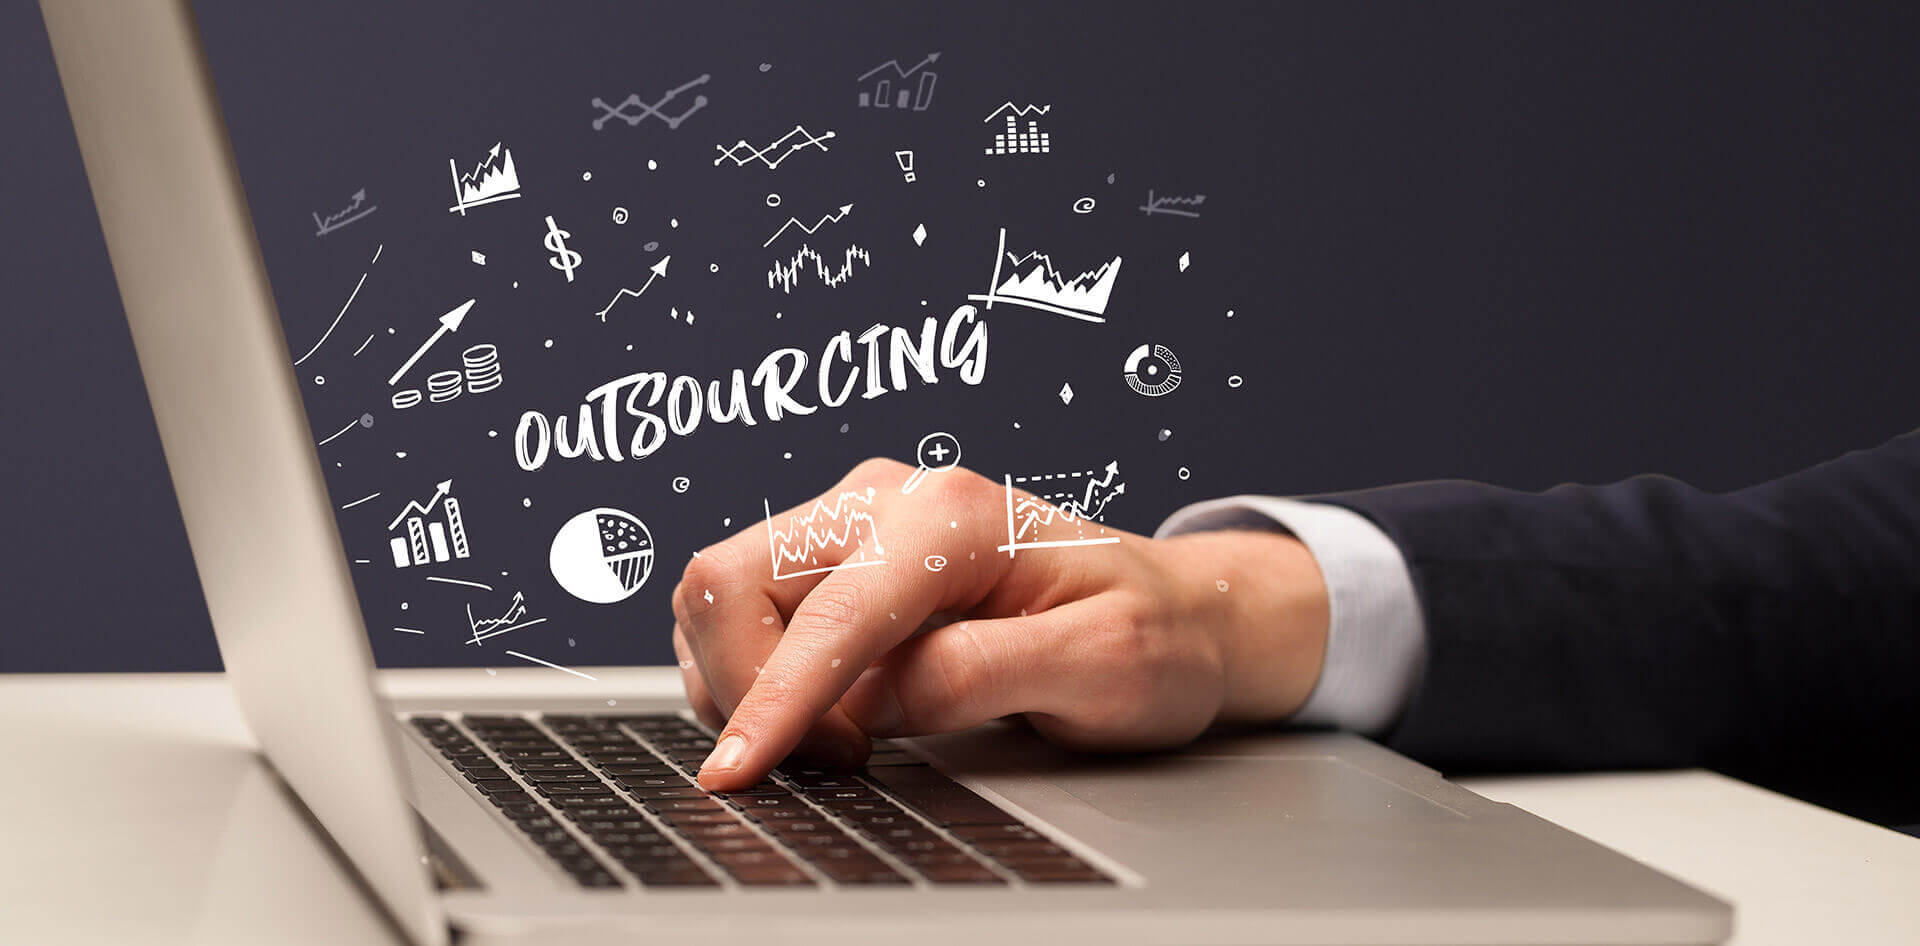 Outsourcing as a <em>Labor of Love</em>